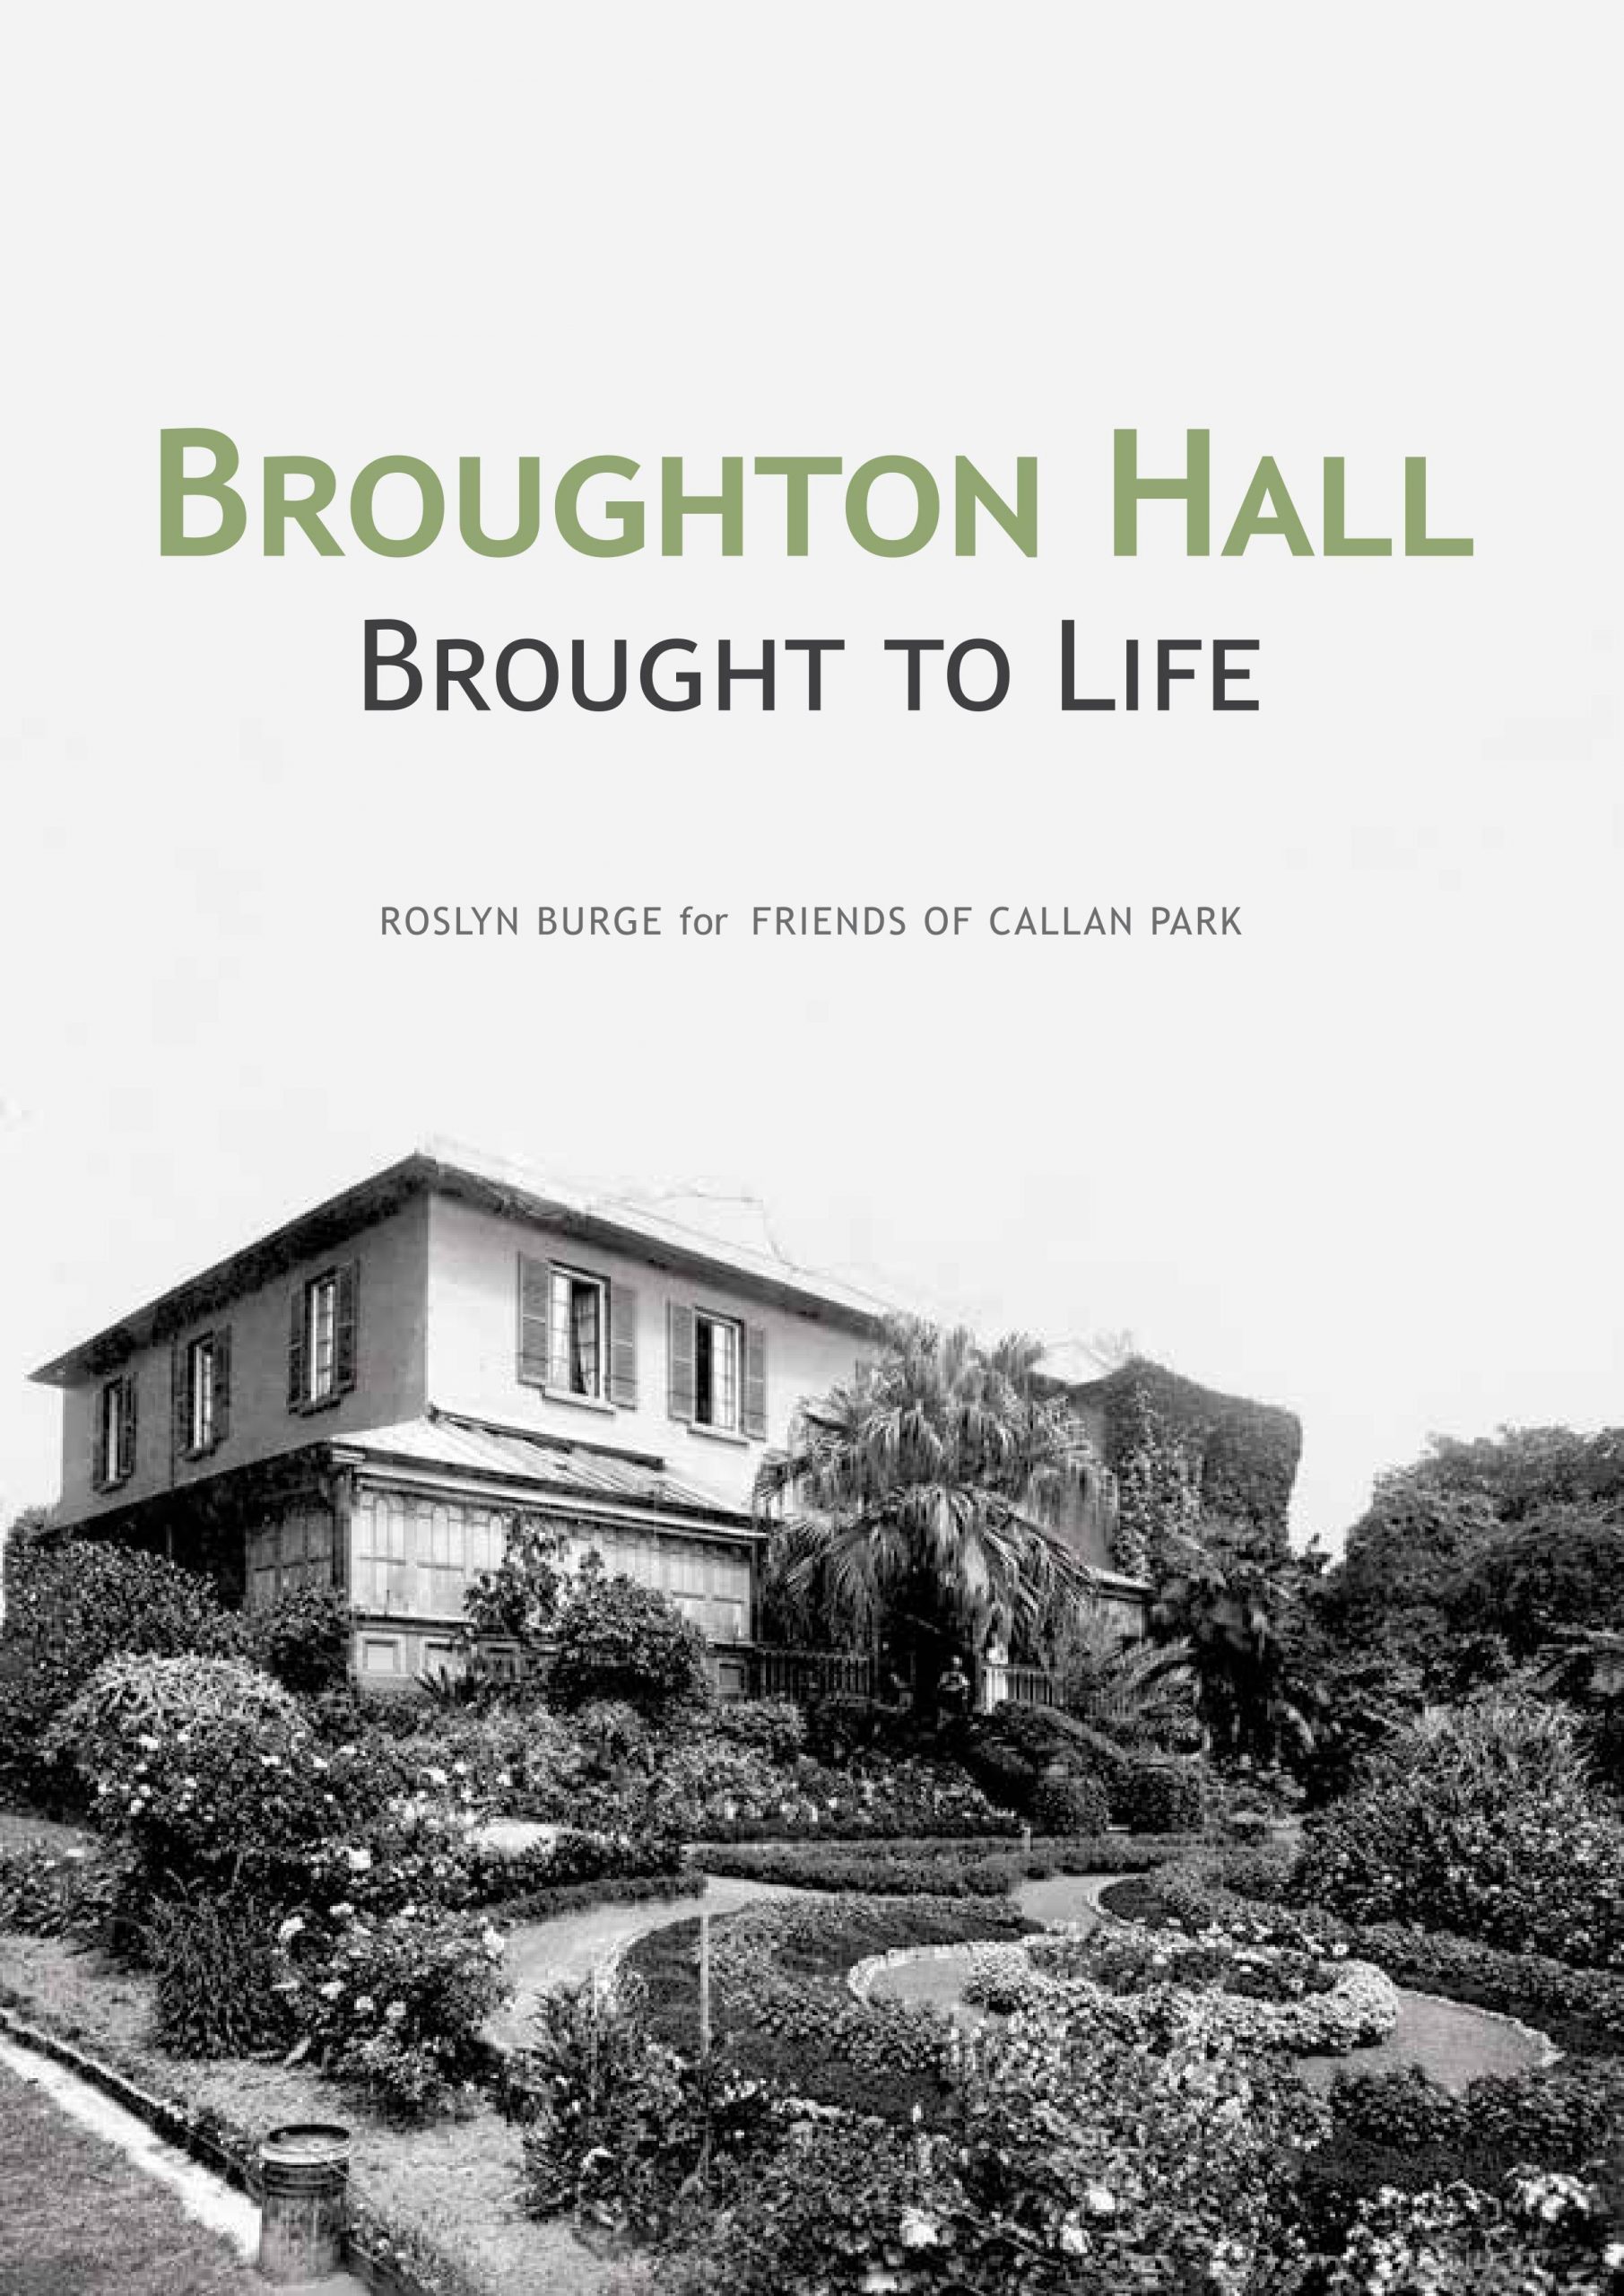 Broughton Hall - Brought to Life